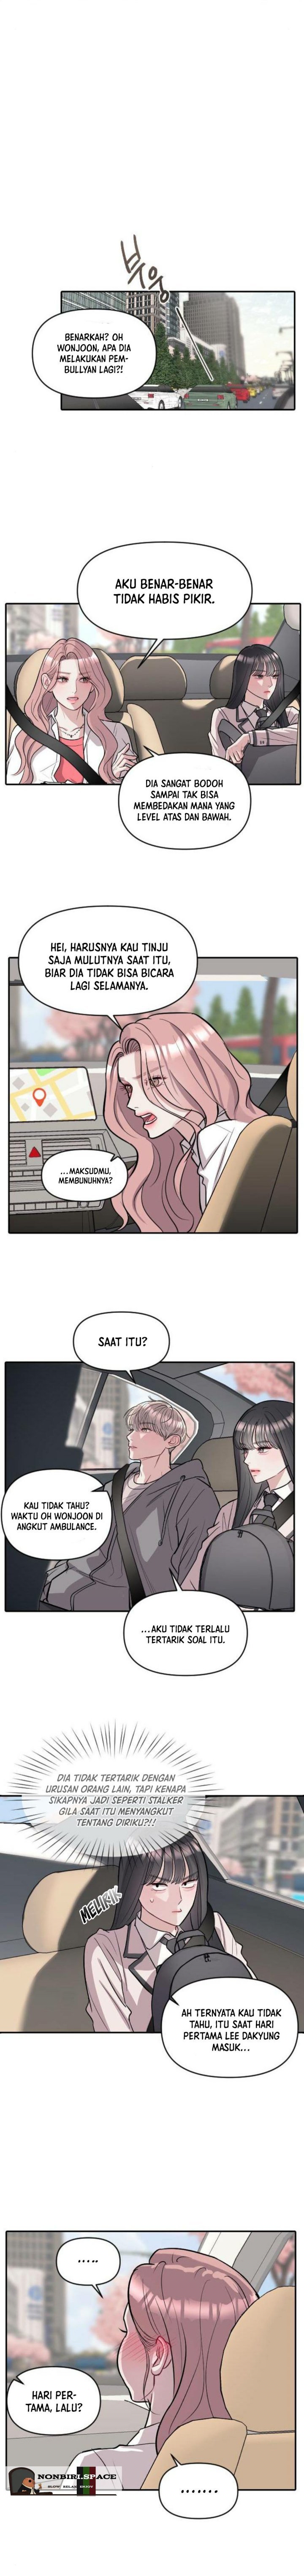 Undercover! Chaebol High School Chapter 09 - 115